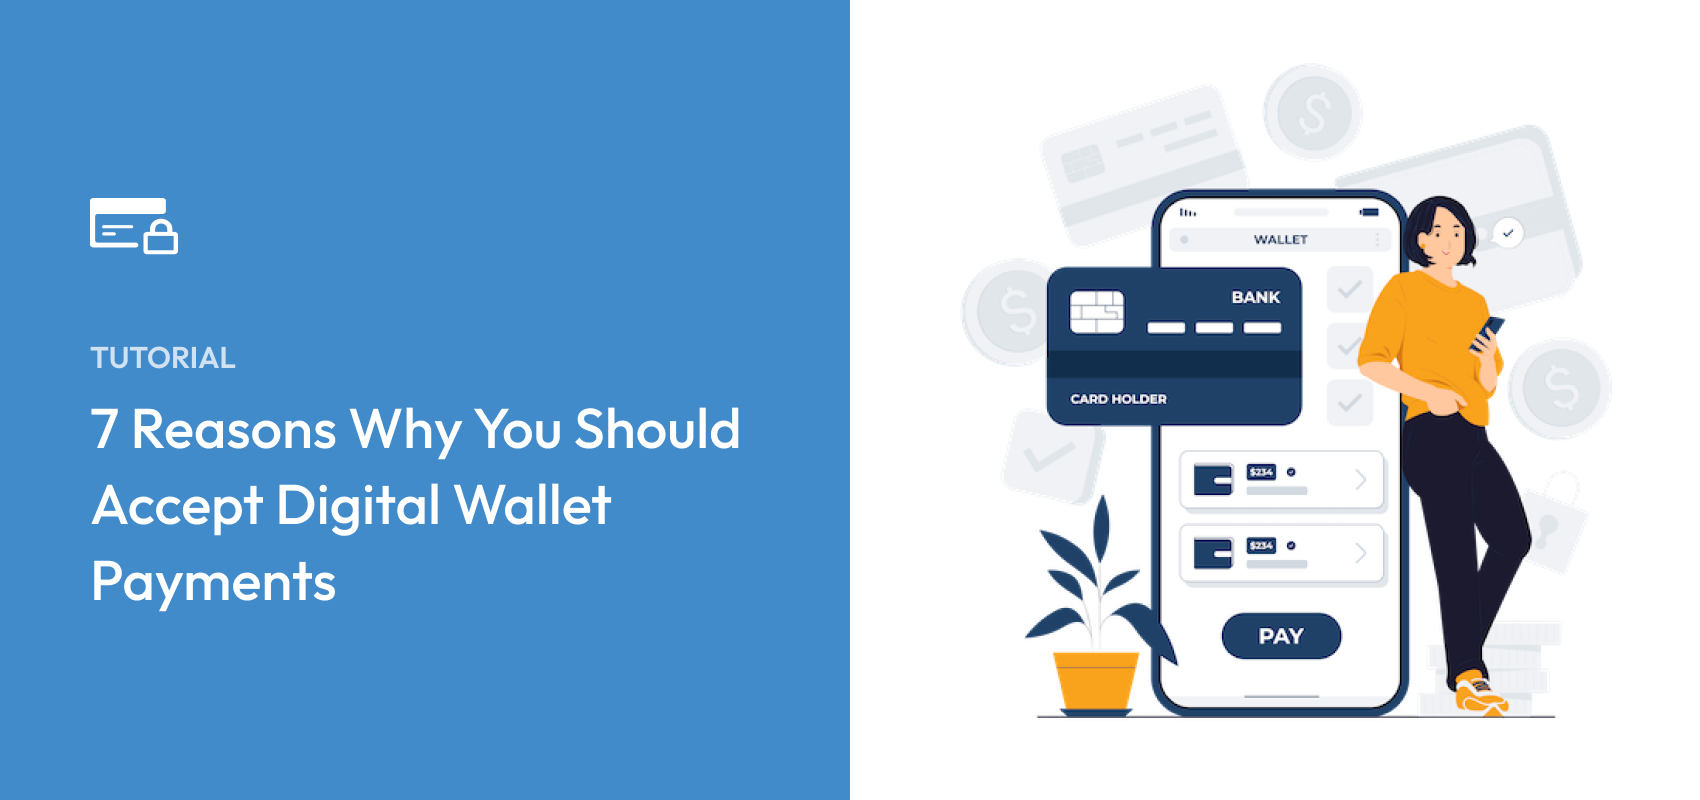 7 Reasons Why You Should Accept Digital Wallet Payments